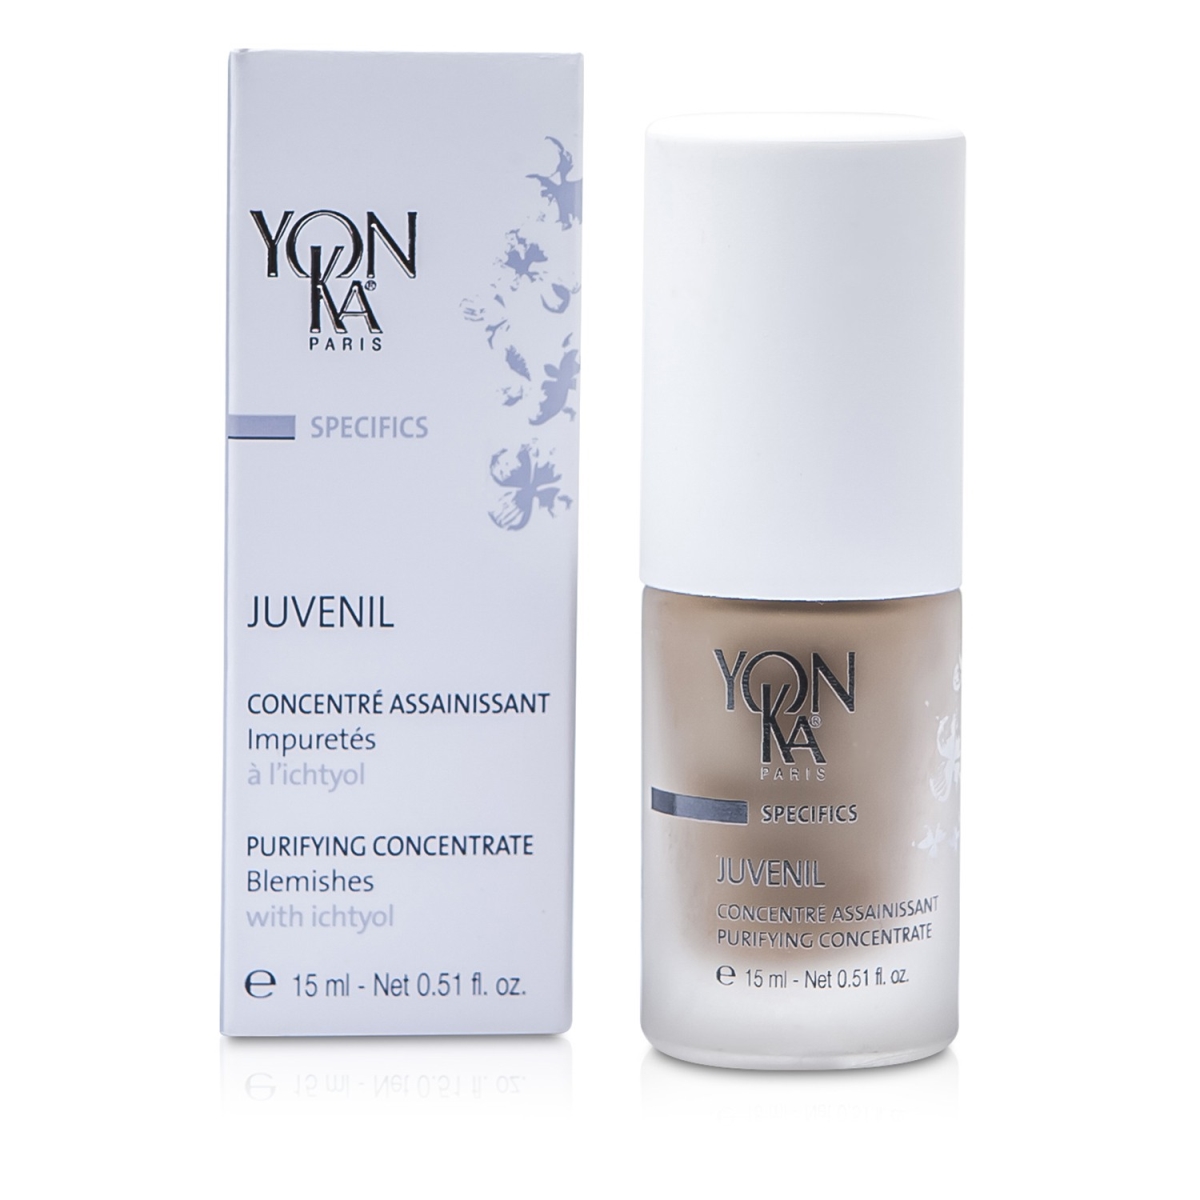 Picture of Yonka 152991 0.51 oz Specifics Juvenil Purifying Solution with Ichtyol for Blemishes